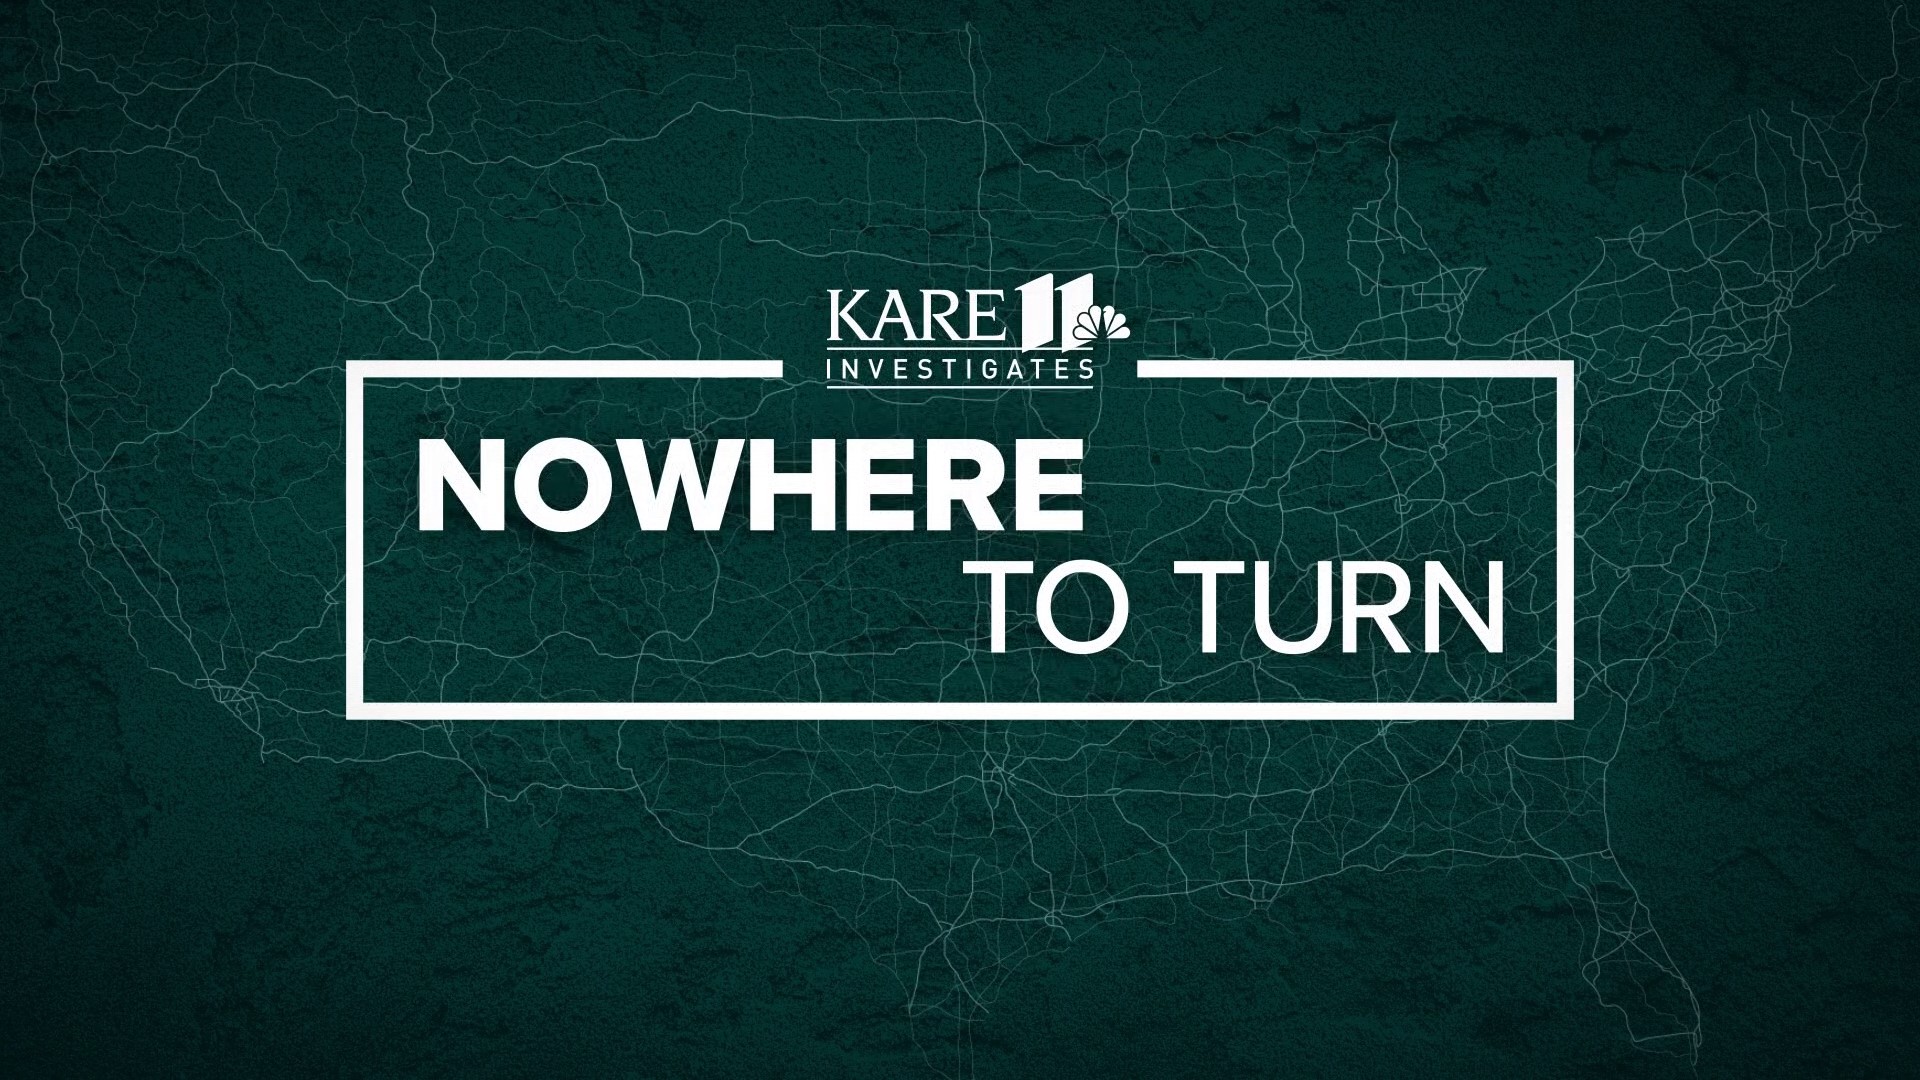 The transport guard at the center of KARE 11’s "Nowhere to Turn" investigation will be sentenced as legal reforms move through the Minnesota Legislature.